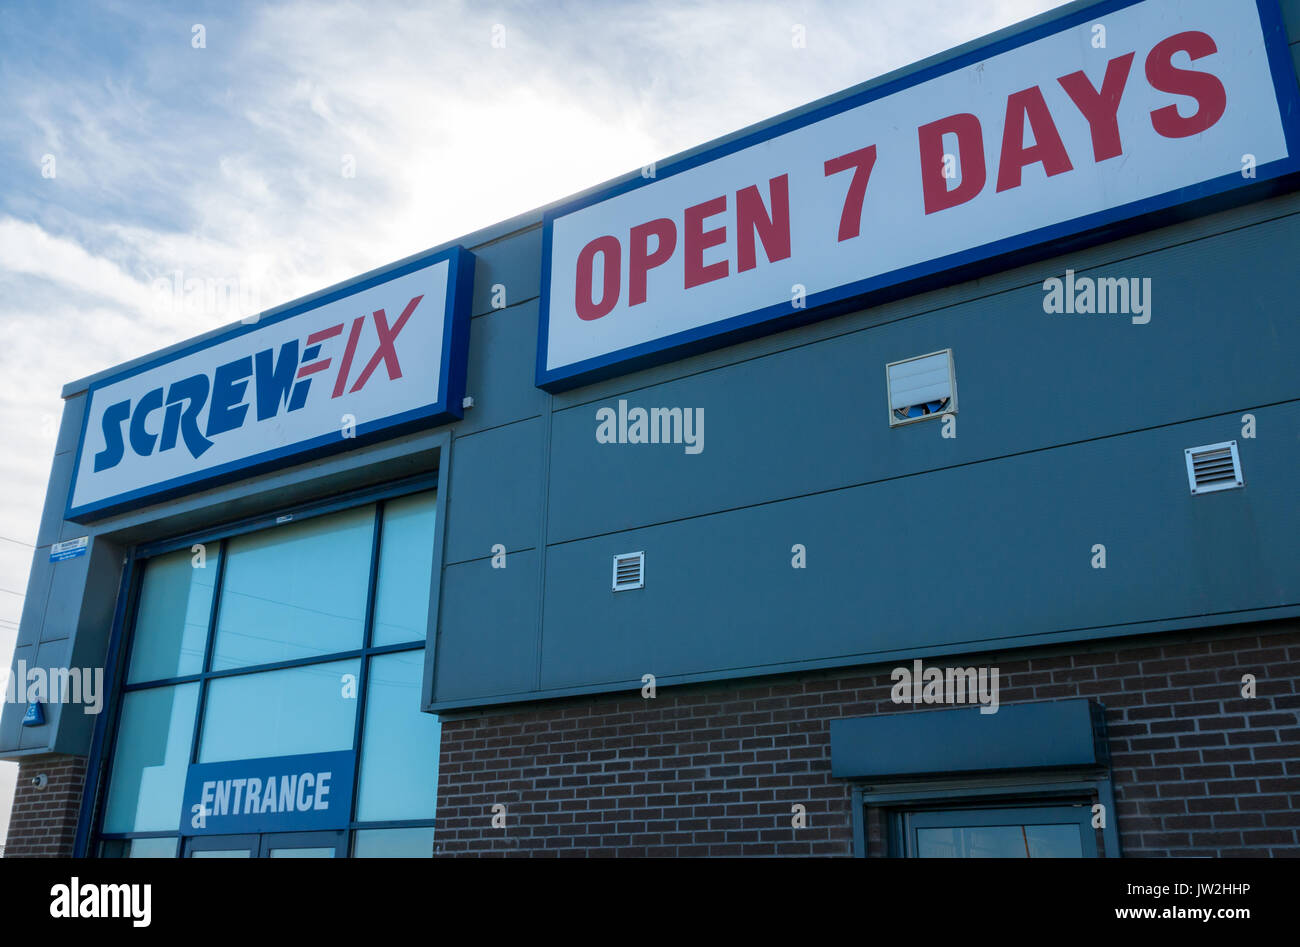 Screwfix shop store front against blue sky, with sign saying Open 7 Days, Seafield, Leith, Edinburgh, Scotland, United Kingdom Stock Photo